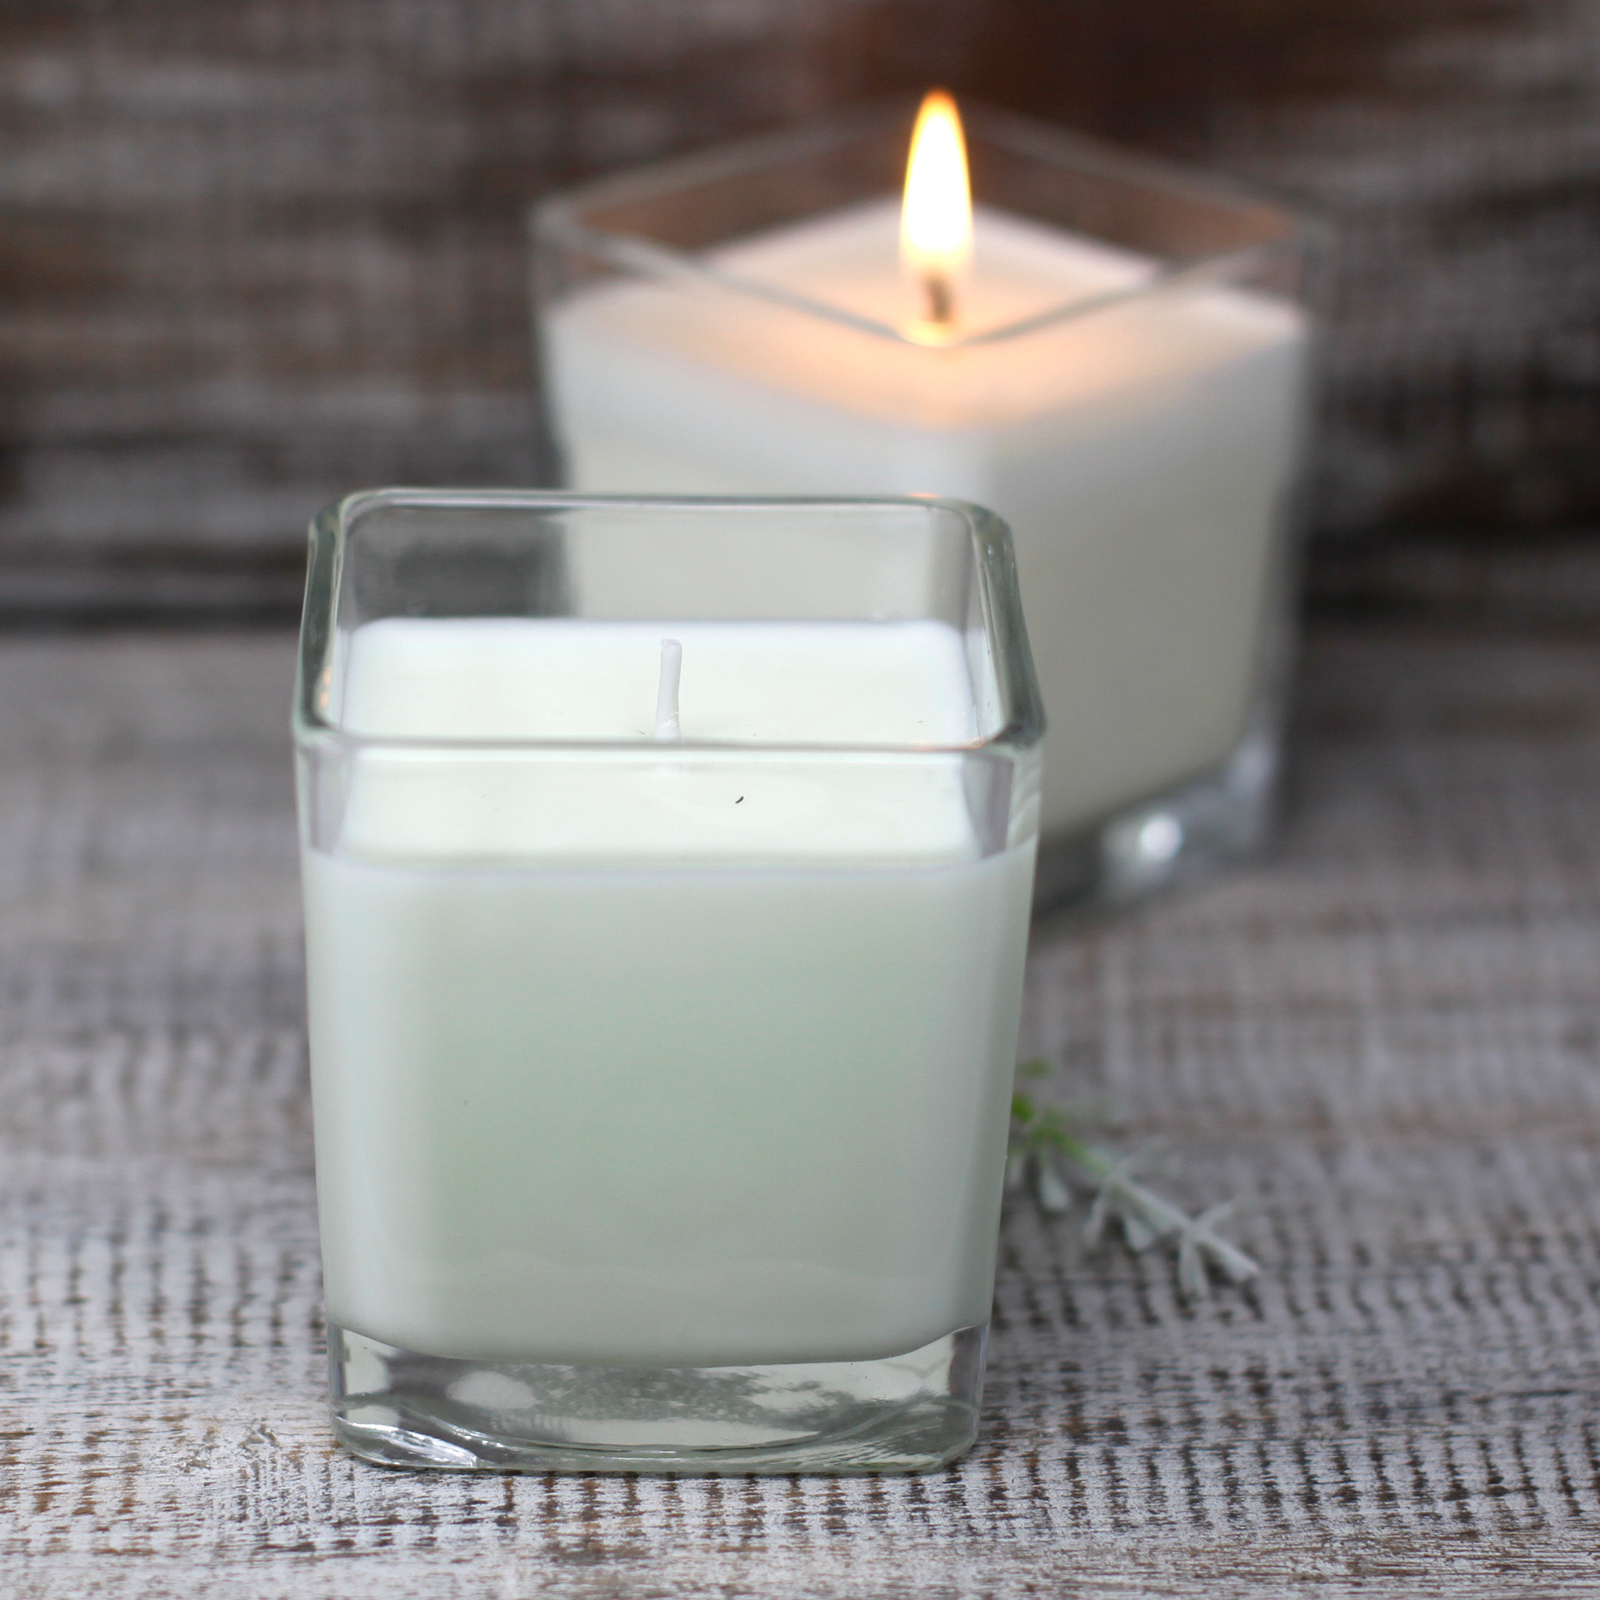 White Label Soy Wax Jar Candle - Bamboo